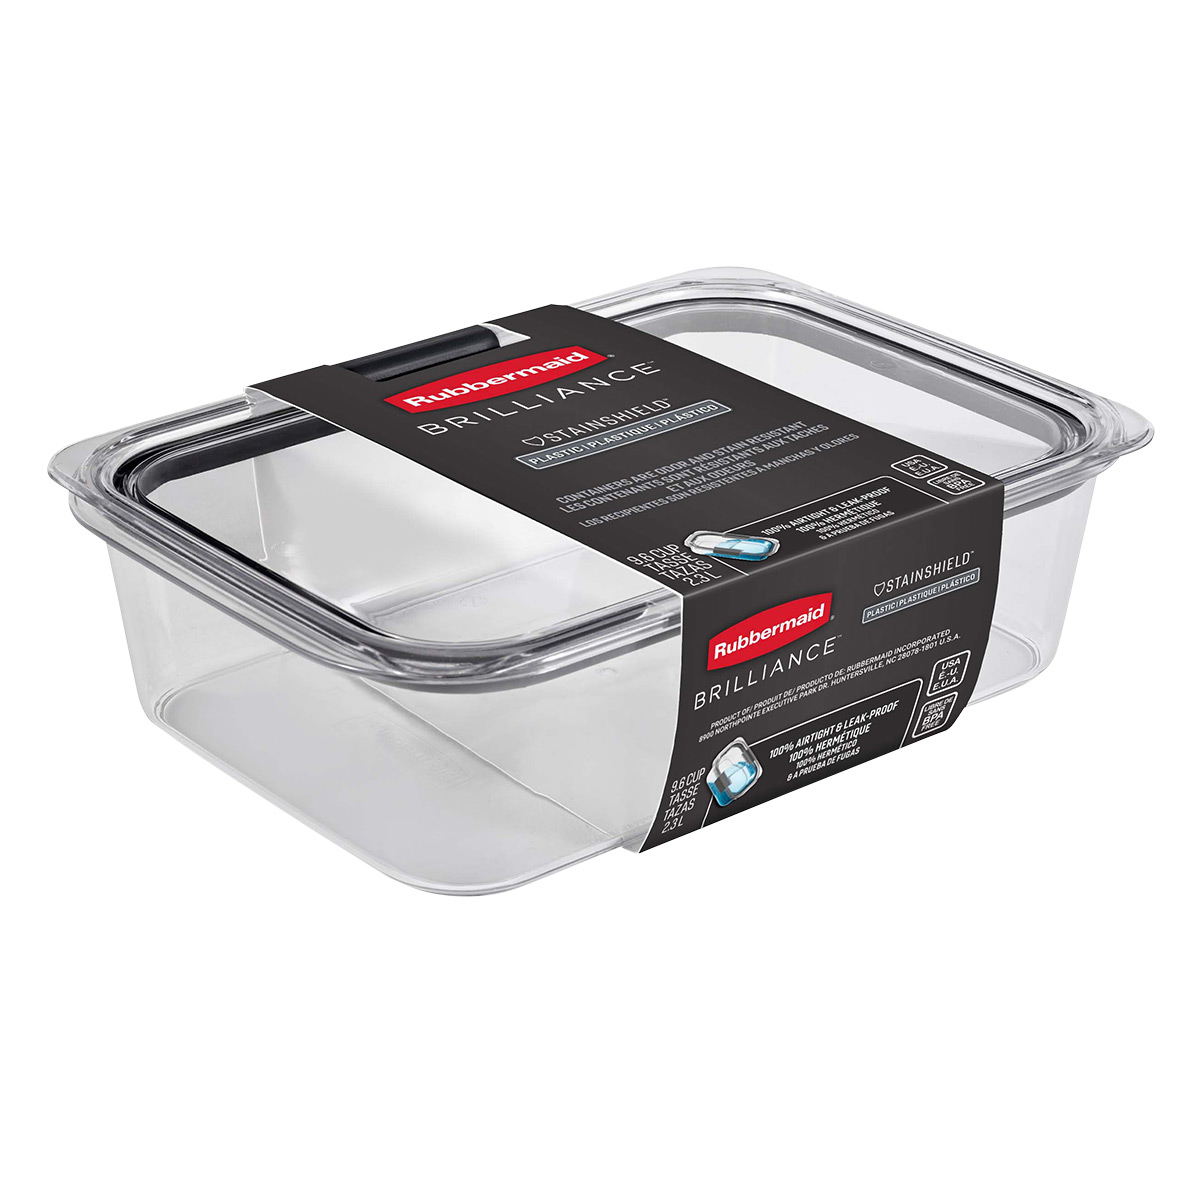 Rubbermaid Brilliance Food Storage Container | The Container Store